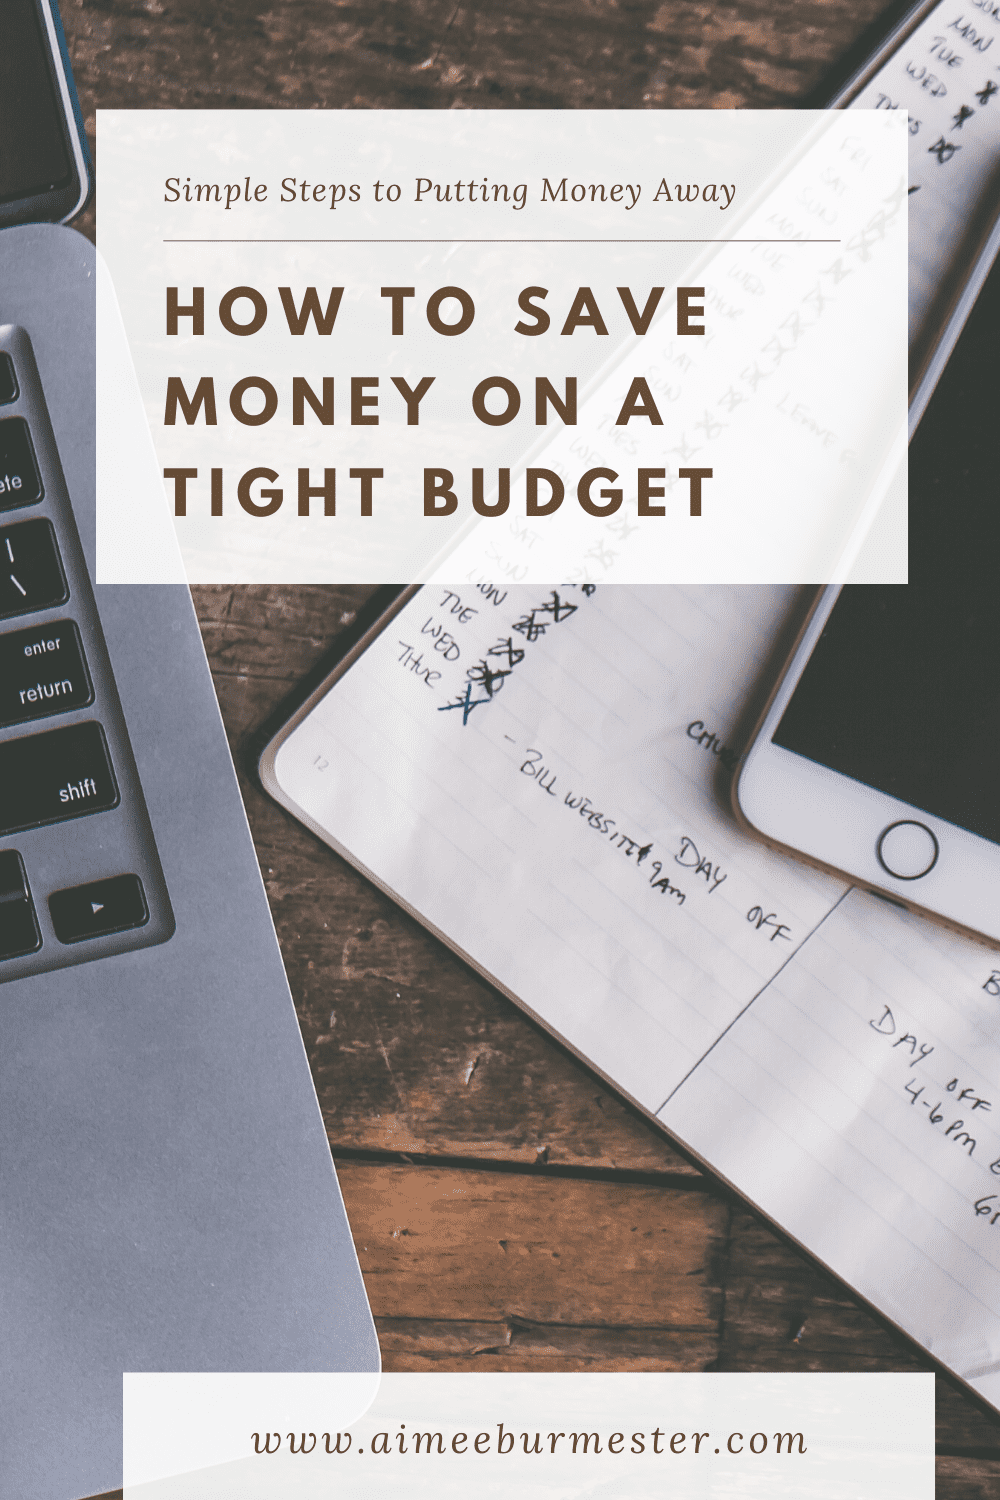 How to Save Money on a Tight Budget